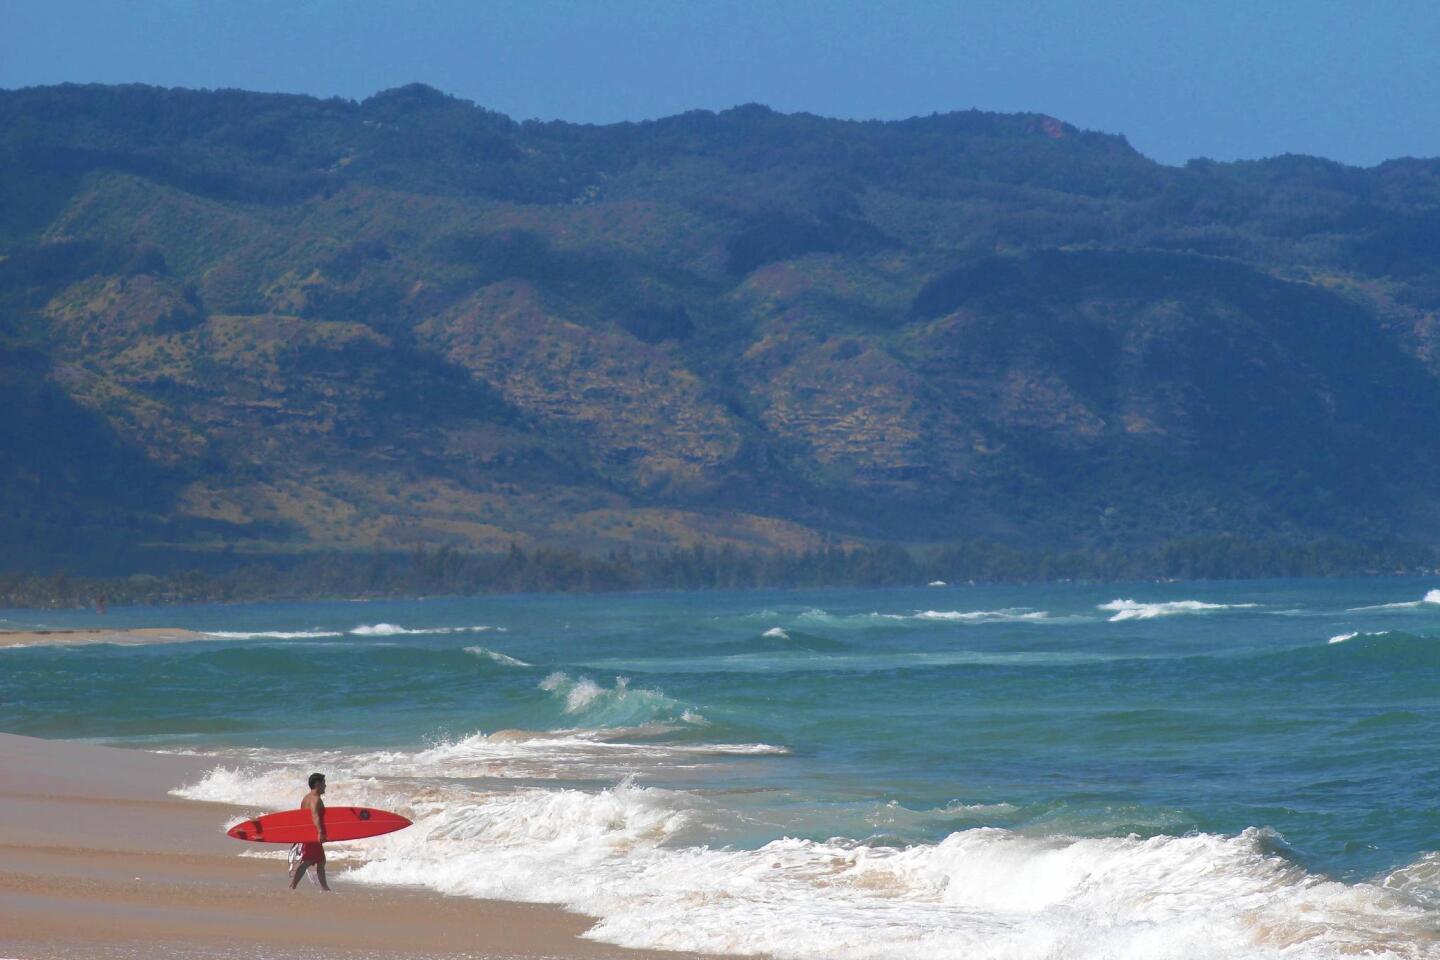 A surfer on dramatic Laniakea Beach sizes up the waves before paddling in. The North Shore beach, also called Turtle Beach, is home to nesting green sea turtles.